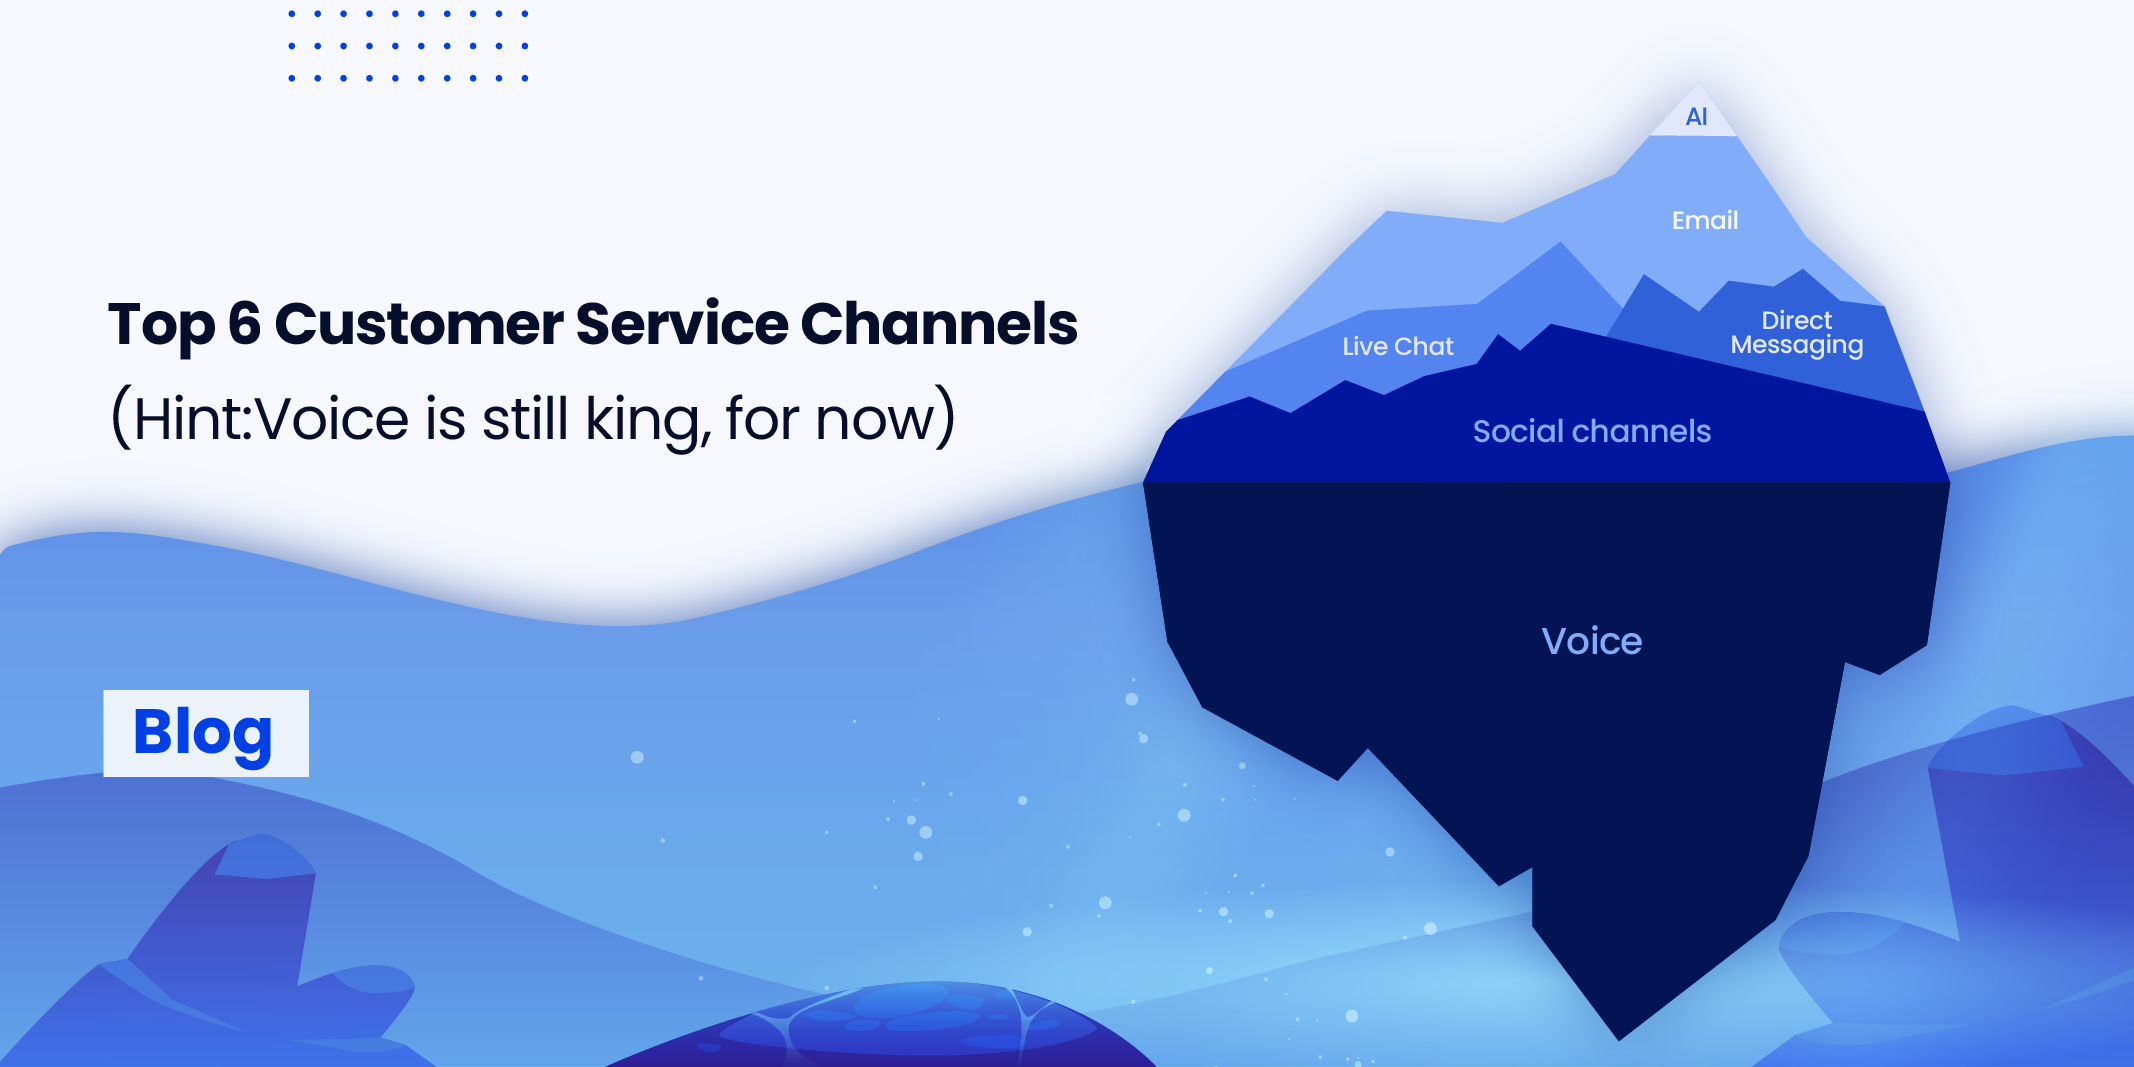  Top 6 Customer Service Channels (Hint:Voice is still king, for now) | Contacto Blog